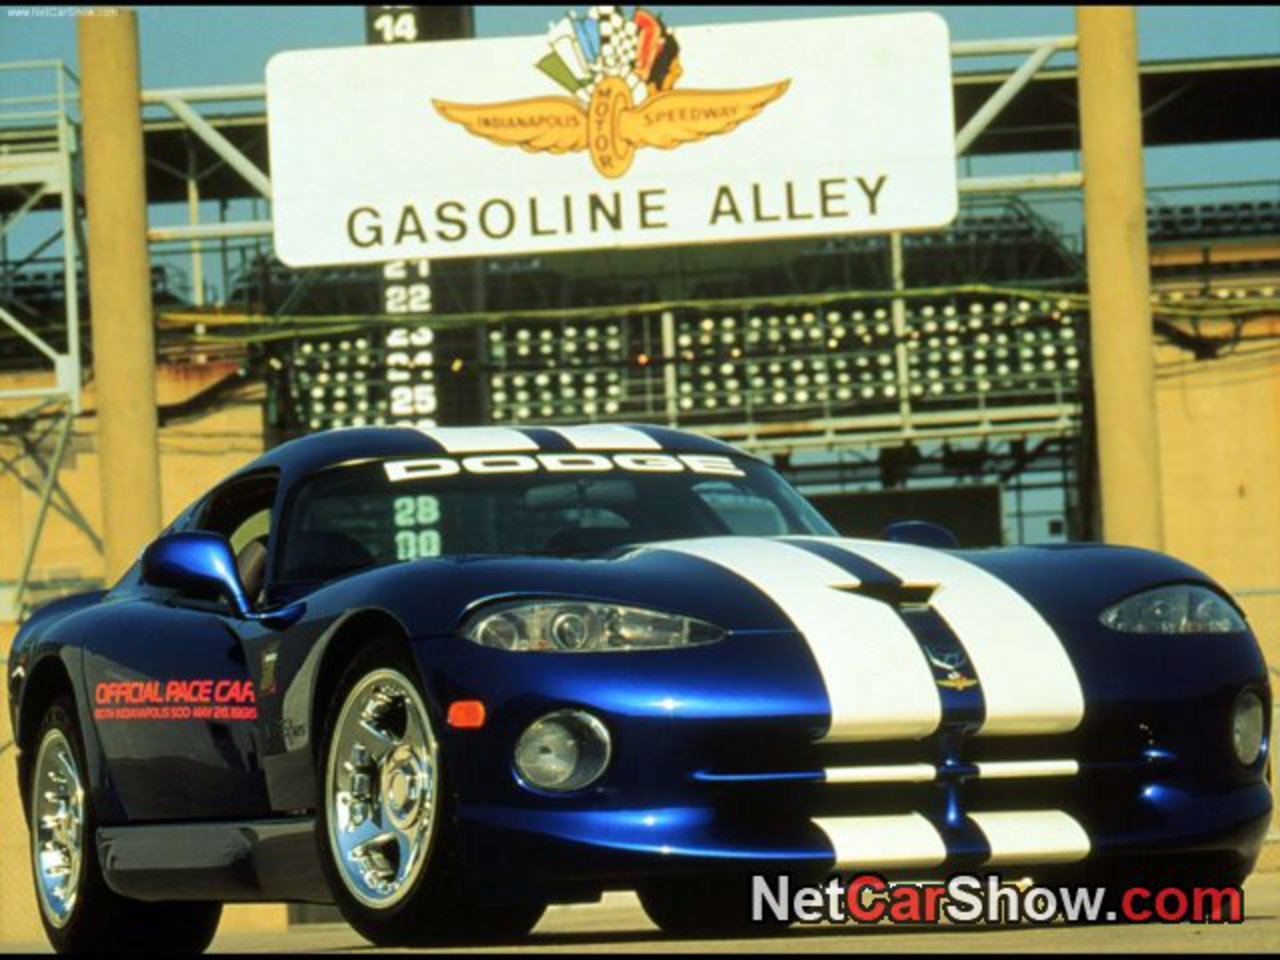 Dodge Viper GTS picture # 01 of 03, Front Angle, MY 1996, 1280x960